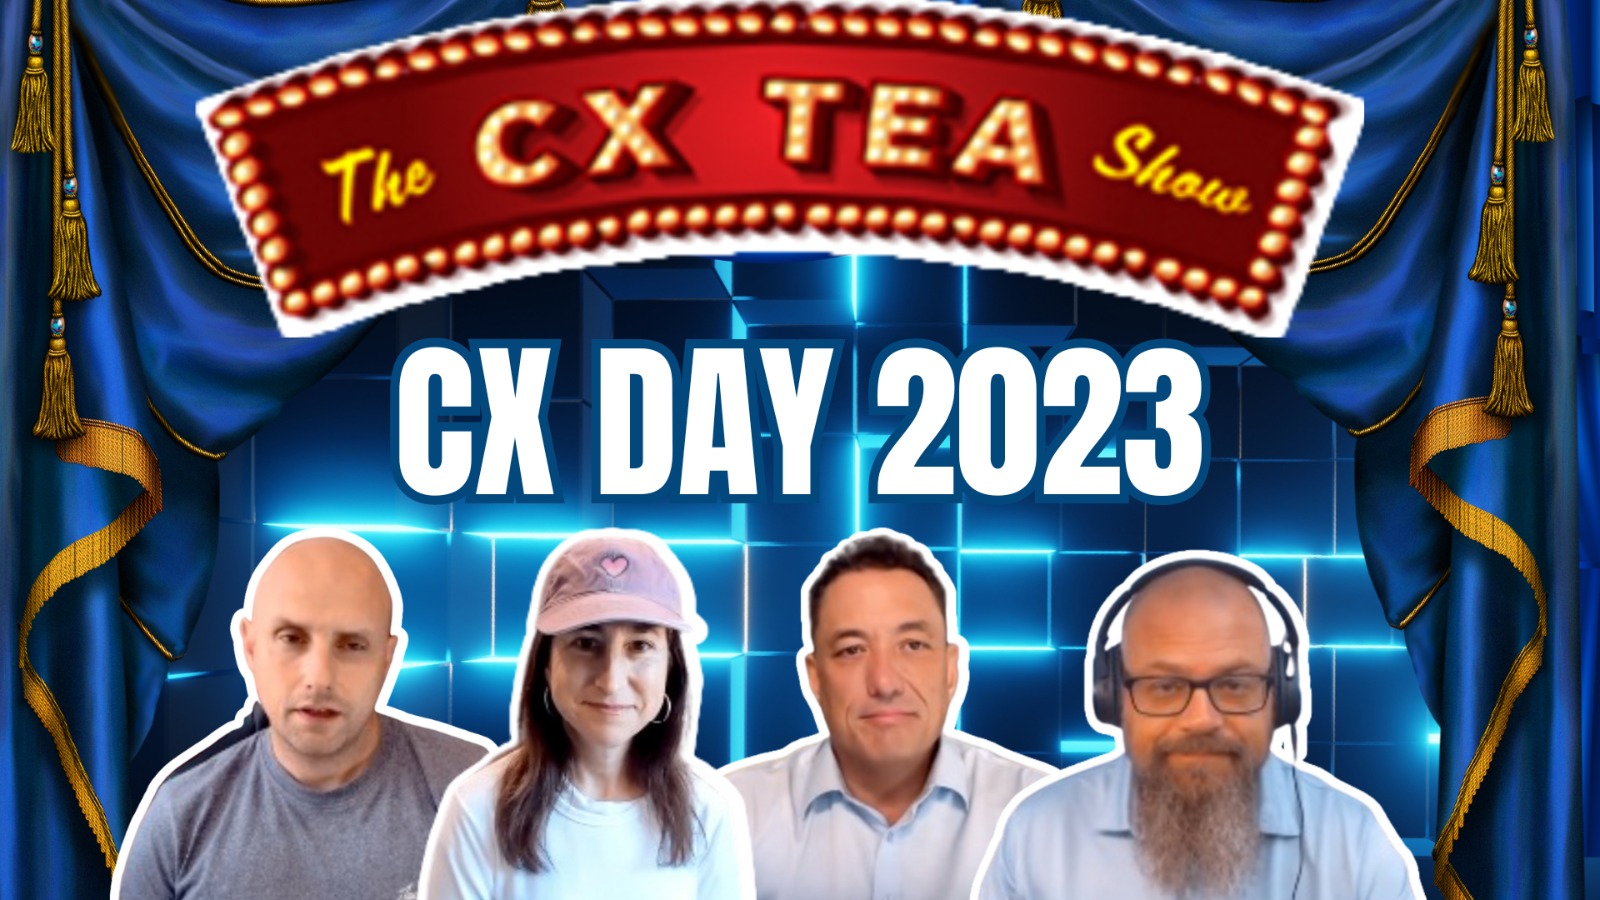 The CX Tea Show Unplugged: An Insider’s View of CX Day 2023